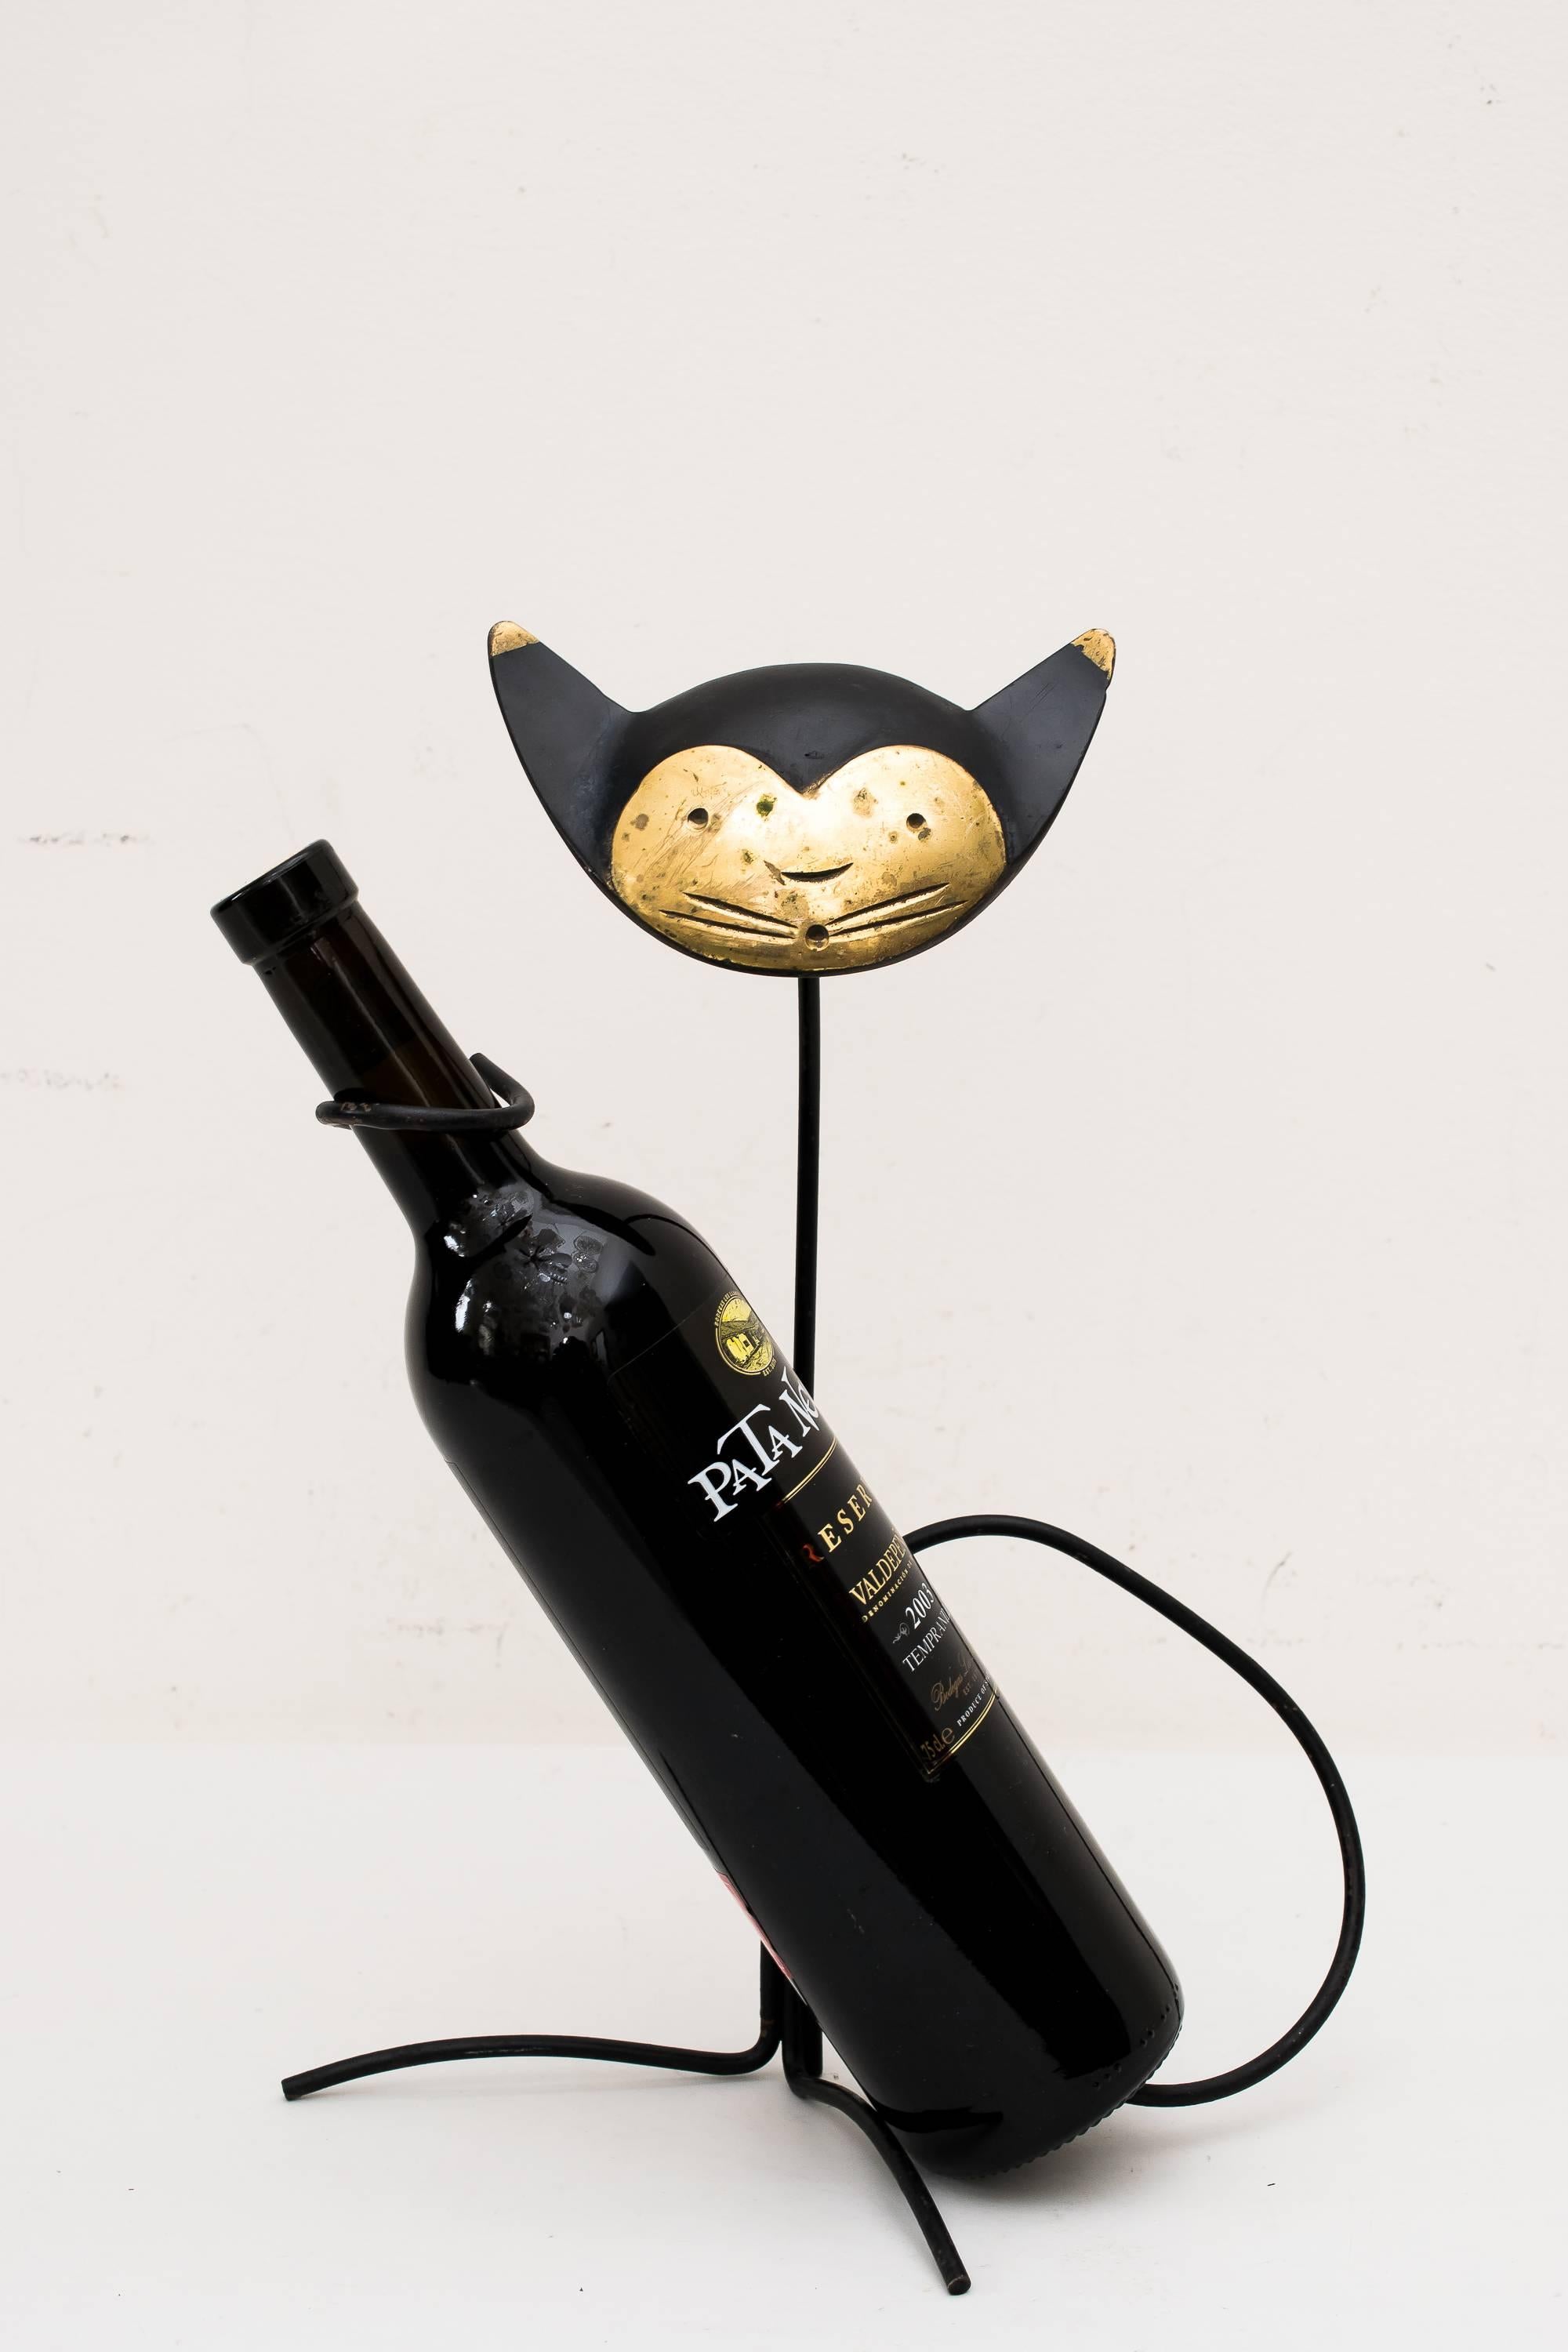 Big brass cat bottle holder by Walter Bosse, circa 1950s
(The Bottle is only decoration, not for sale)
Original condition.